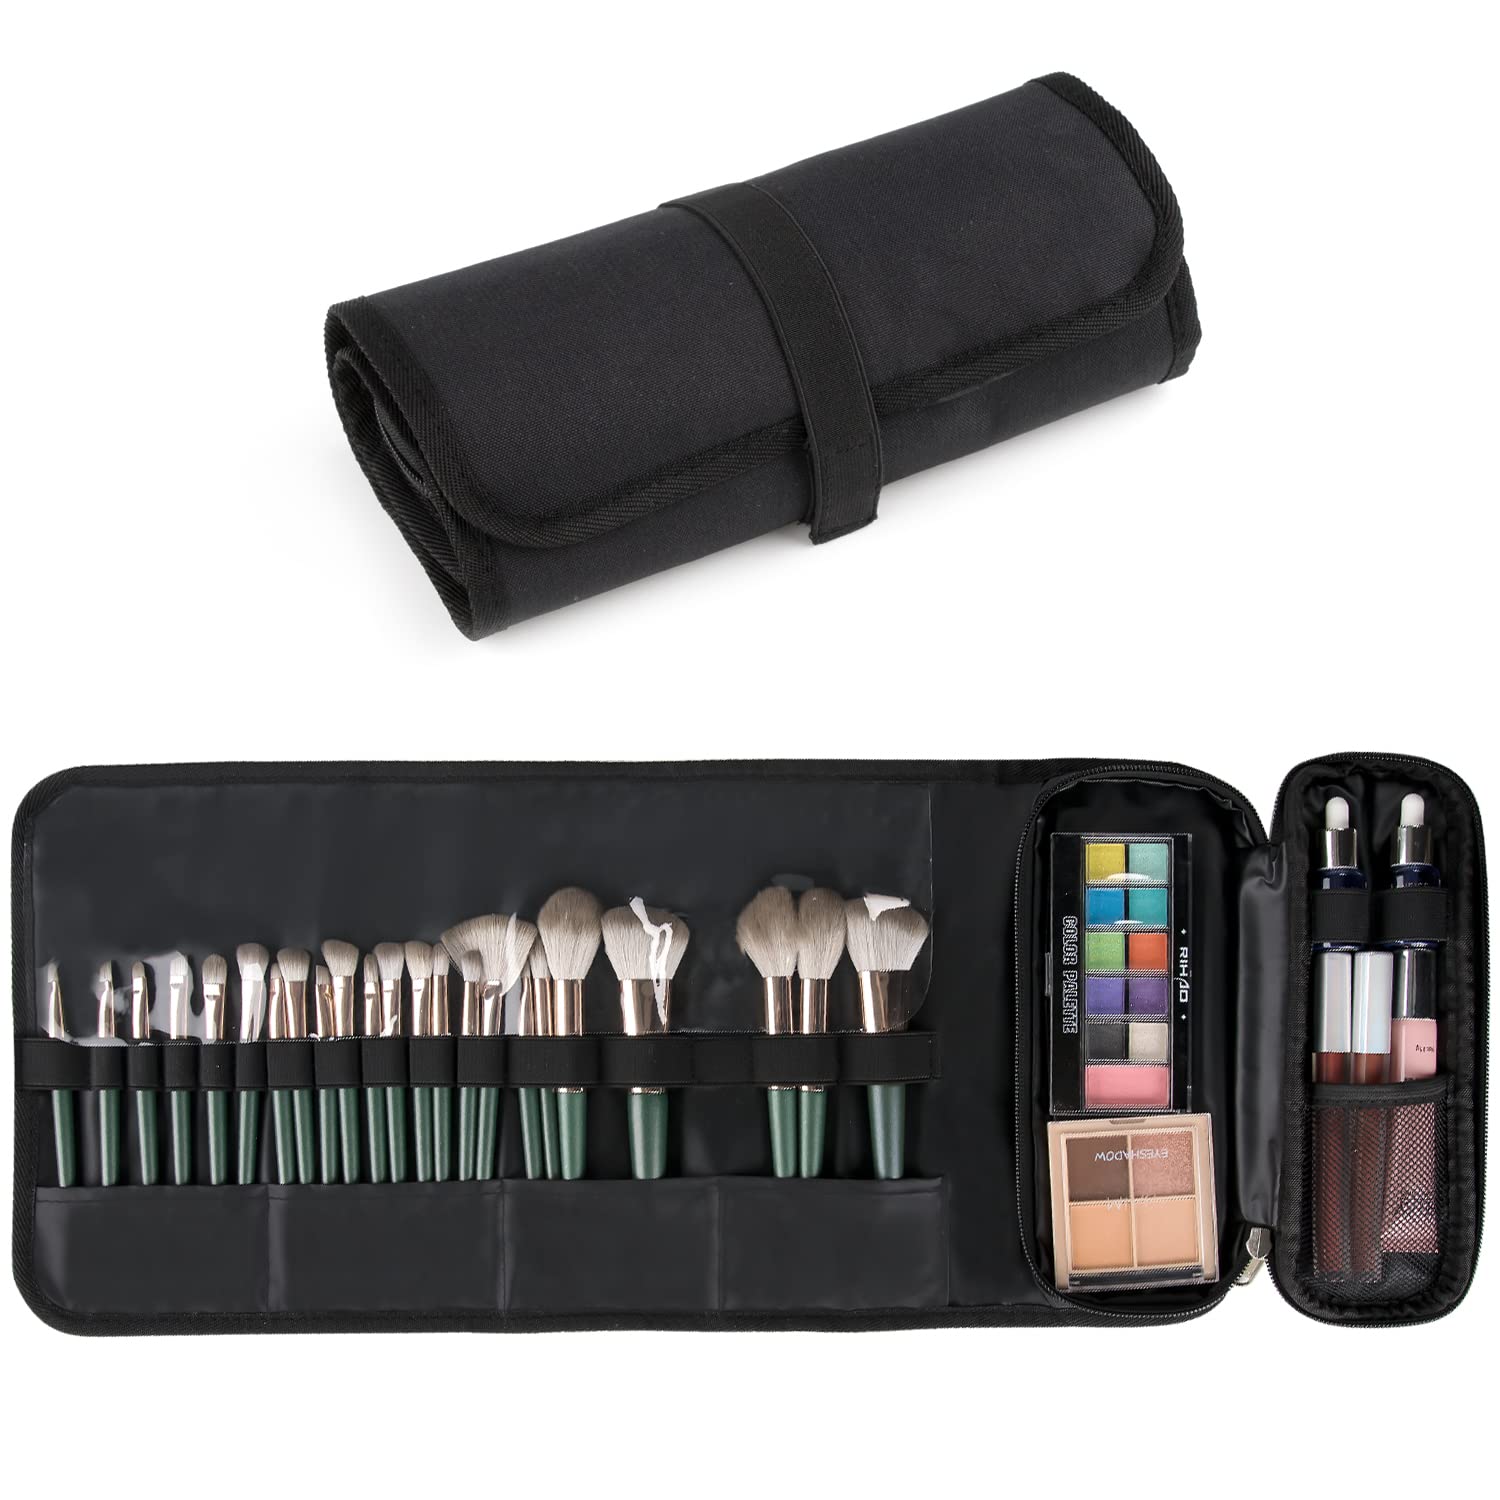 Makeup Brush Rolling Case Makeup Brush Bag Pouch Holder Cosmetic